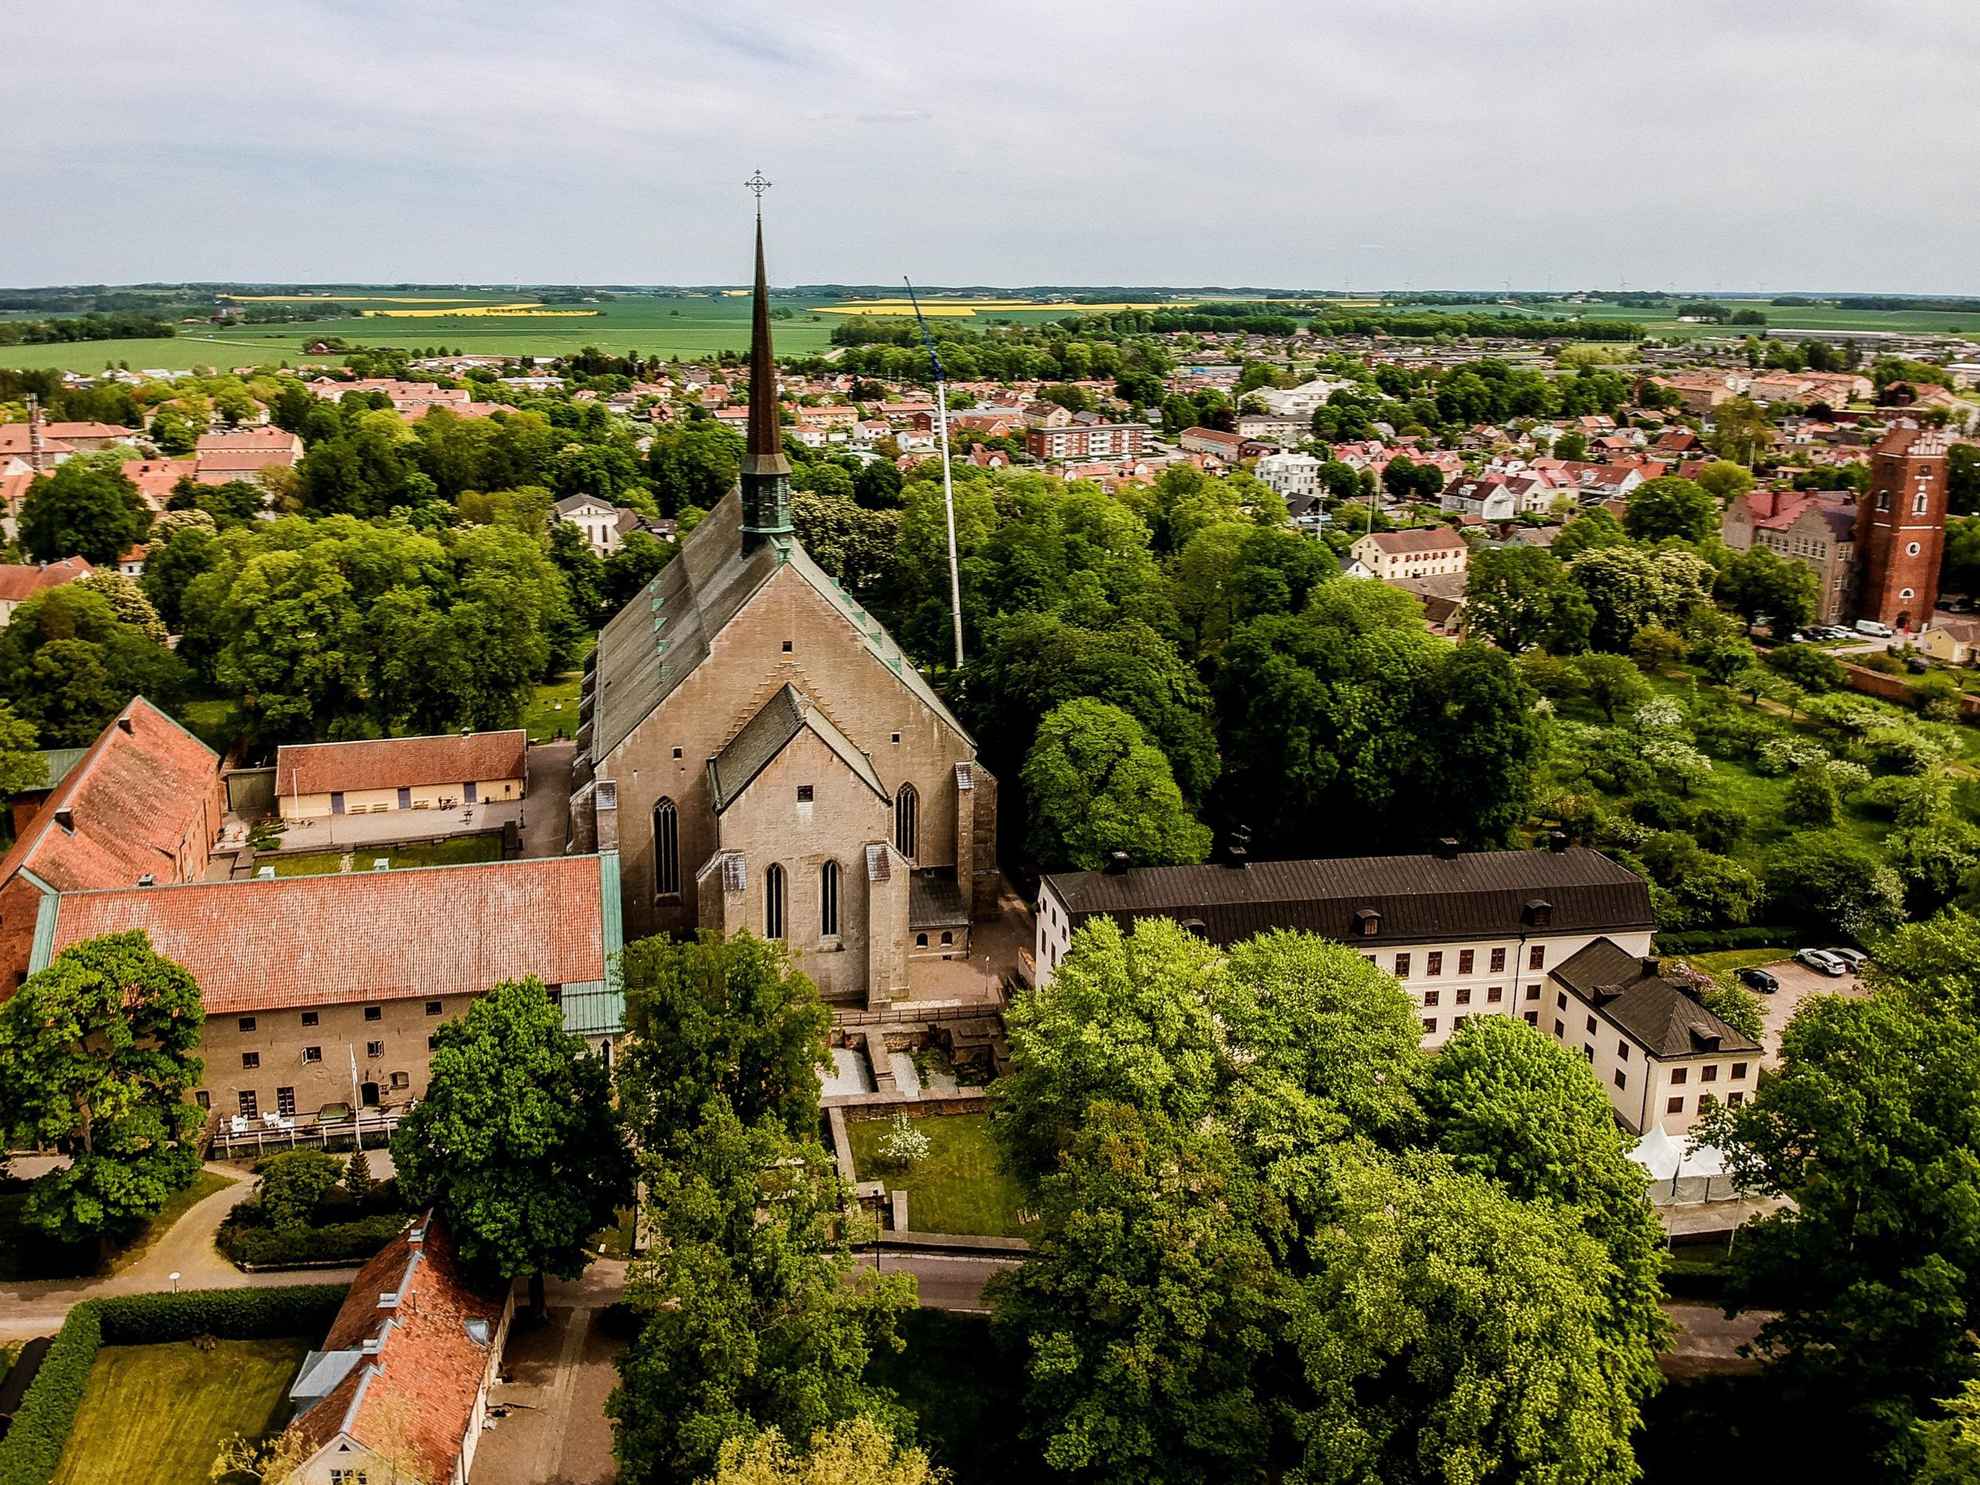 Aerial photo of the monastery in Vadstena surrounded by greenery during the summer.